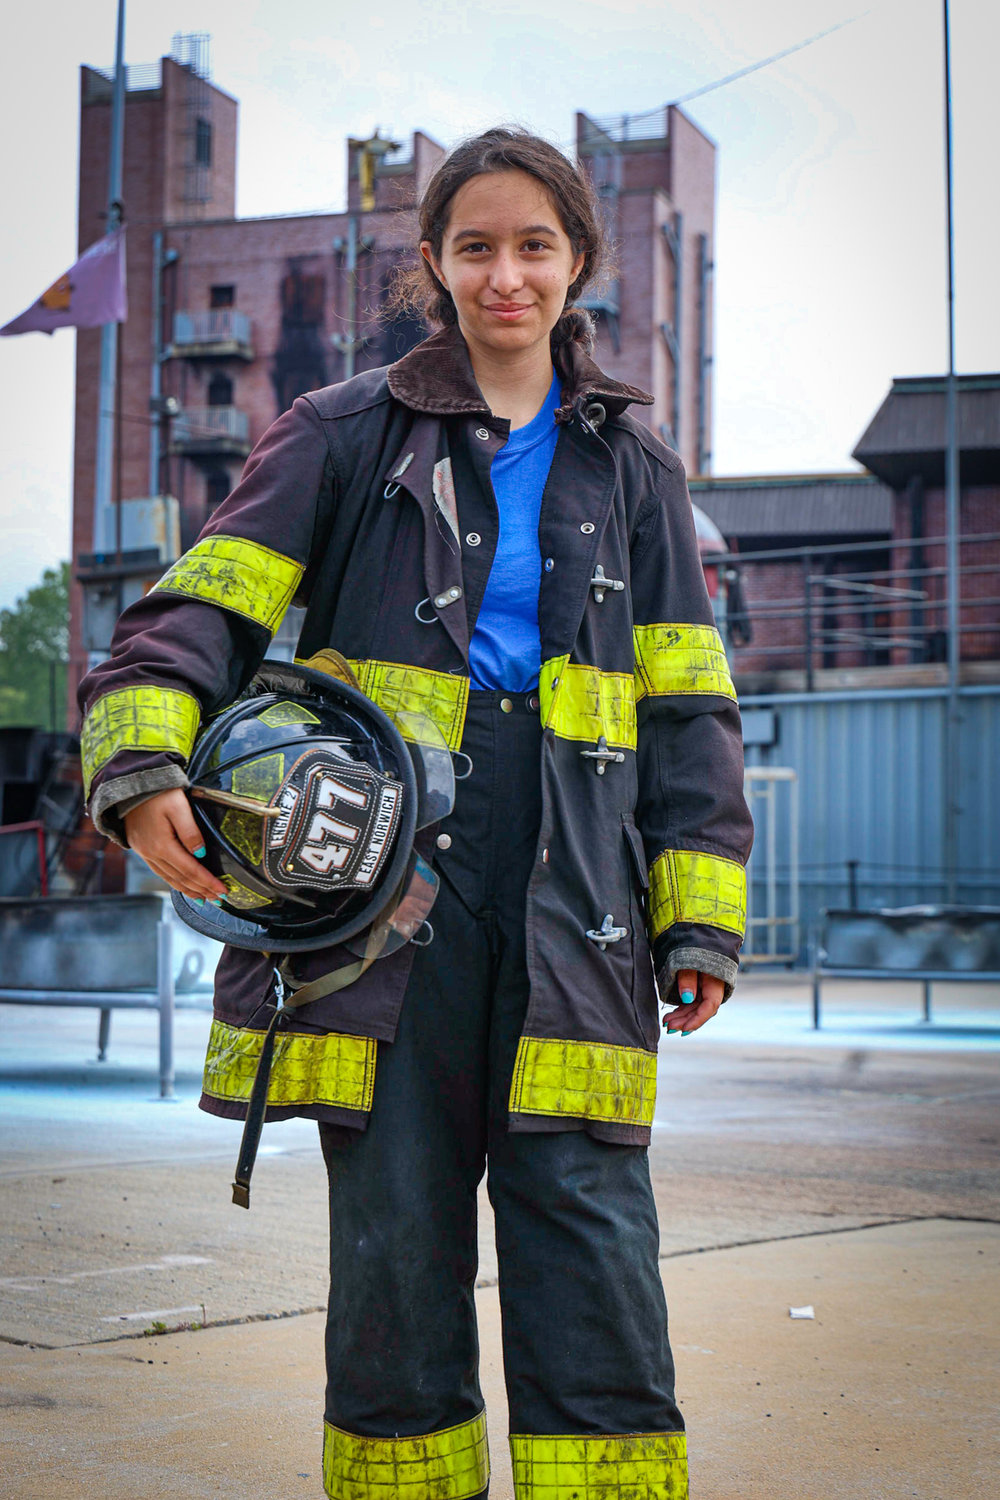 Khadeejah said she wanted to be a New York City firefighter someday.